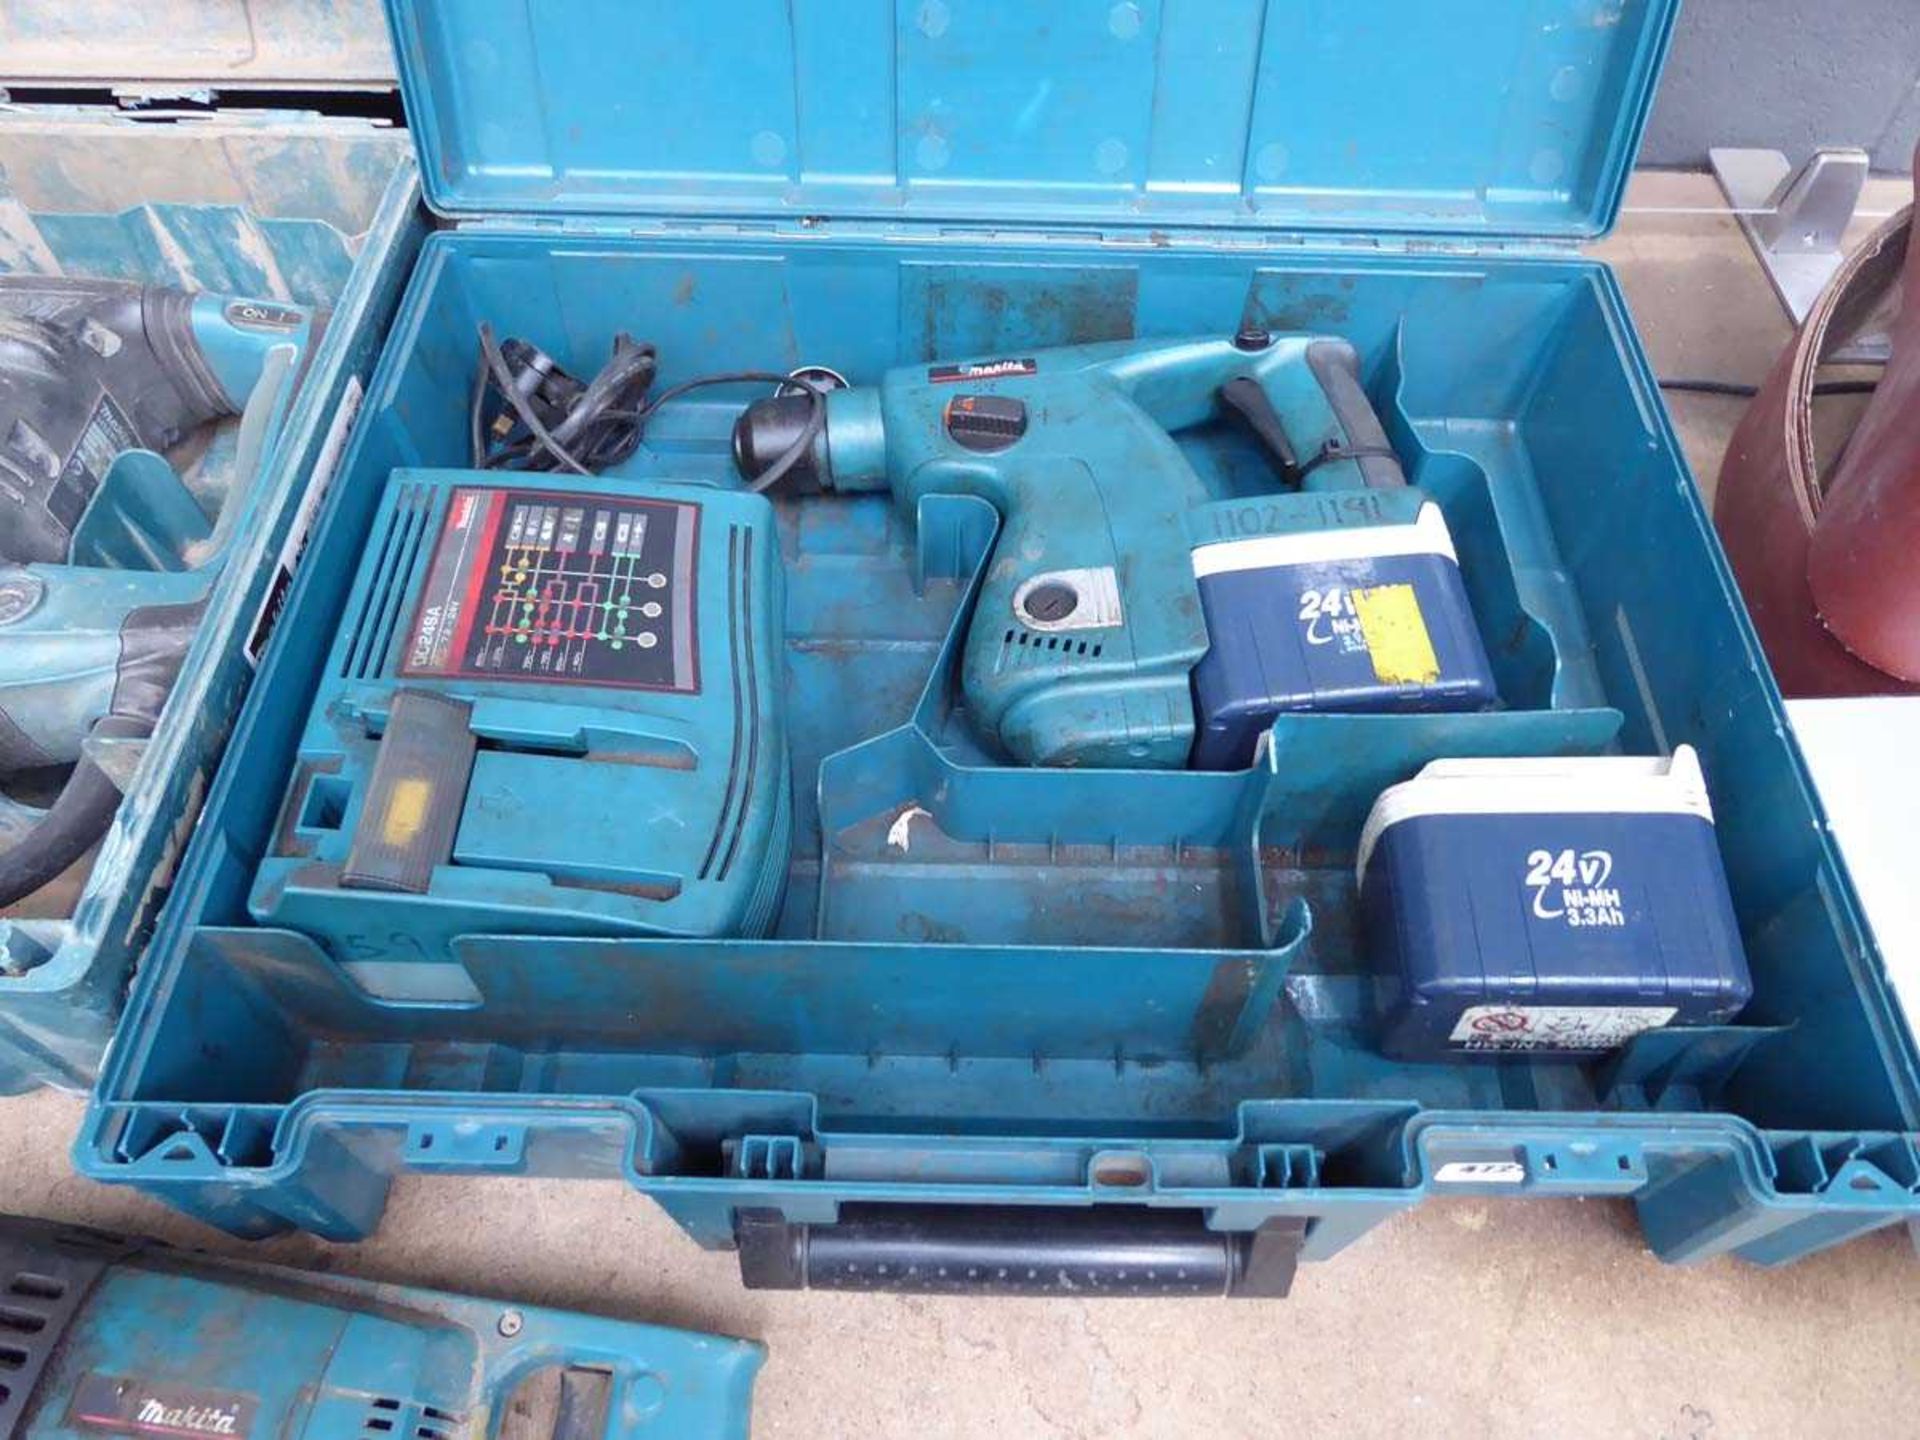 Makita 24V battery drill with 2 batteries and charger